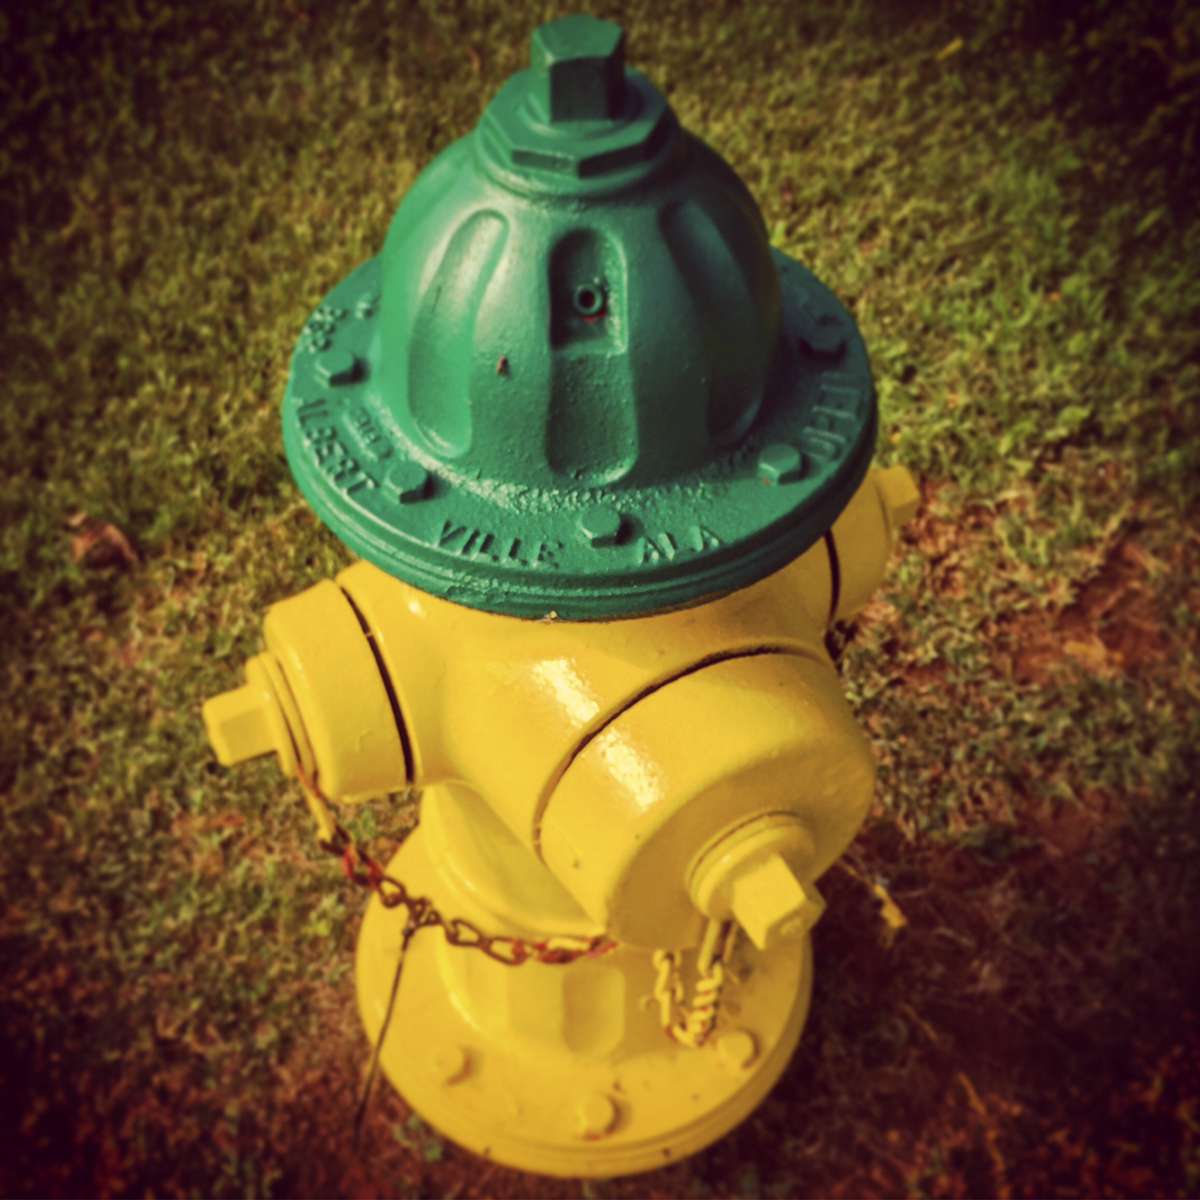 fire hydrant hydrant safety iconic firemen a friend h2o